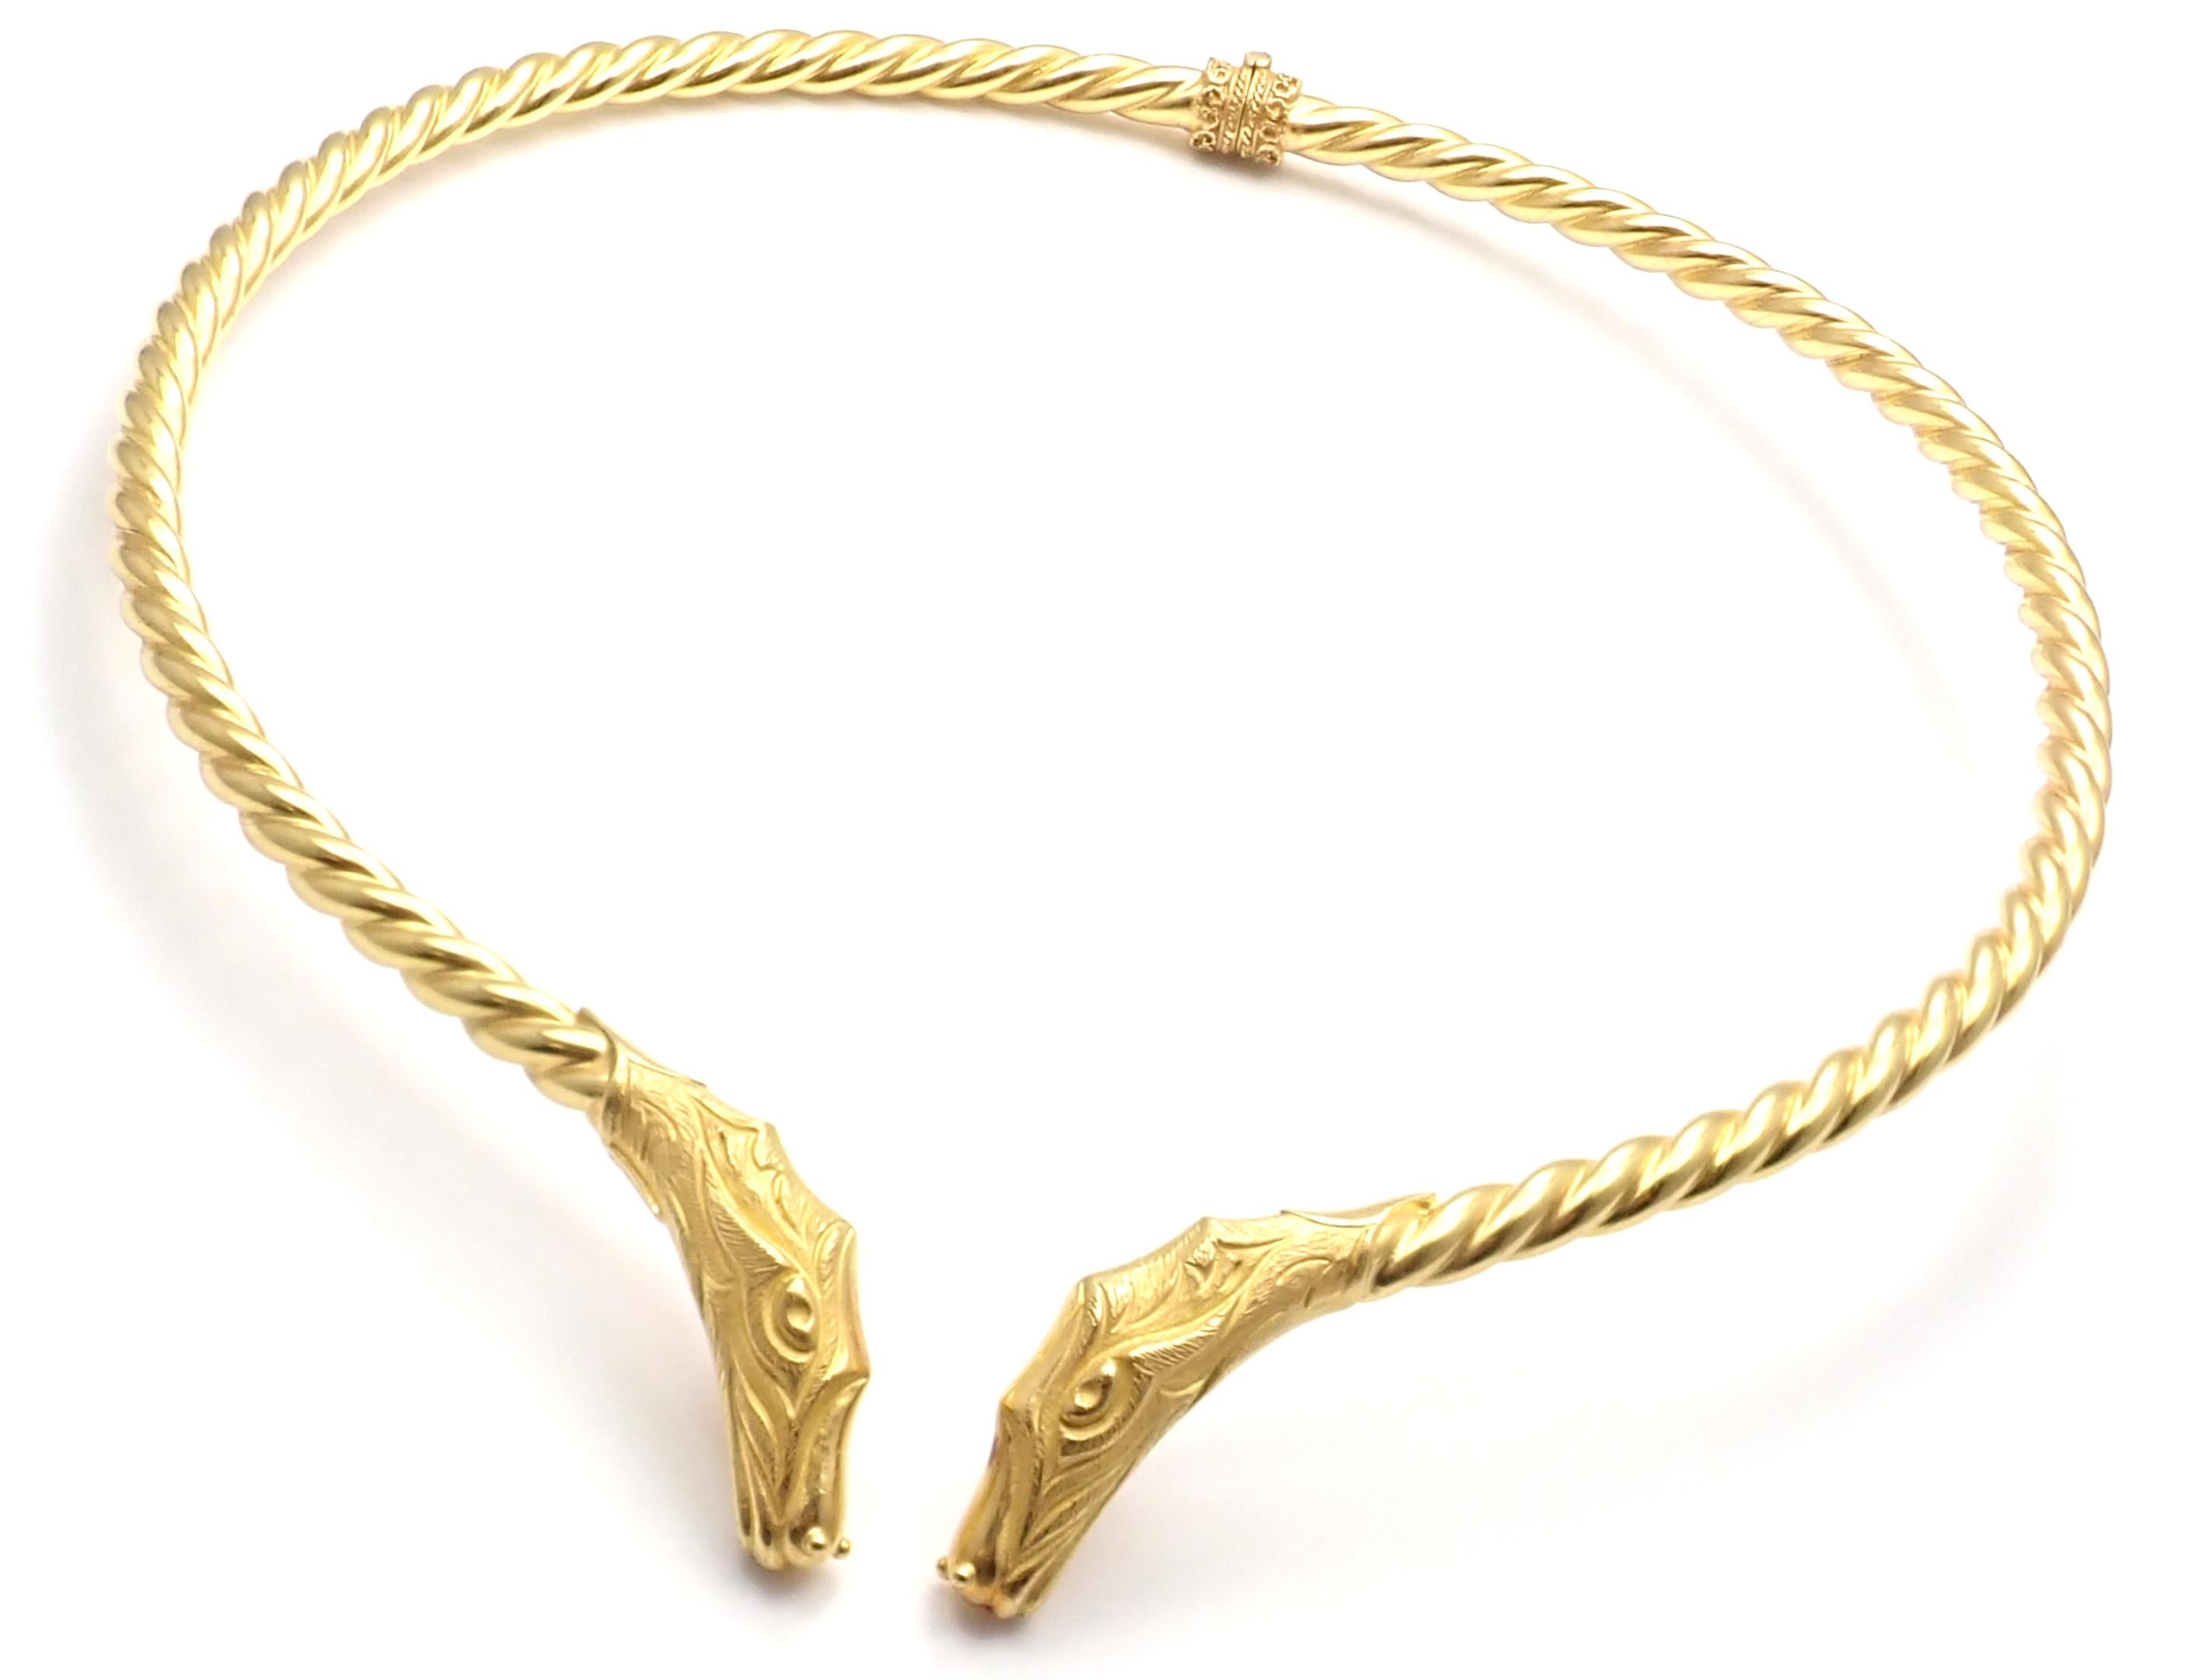 18k Yellow Gold Choker Collar Necklace by Illias Lalaounis Greece. 
Details: 
Weight: 47.4 grams
Length: 15